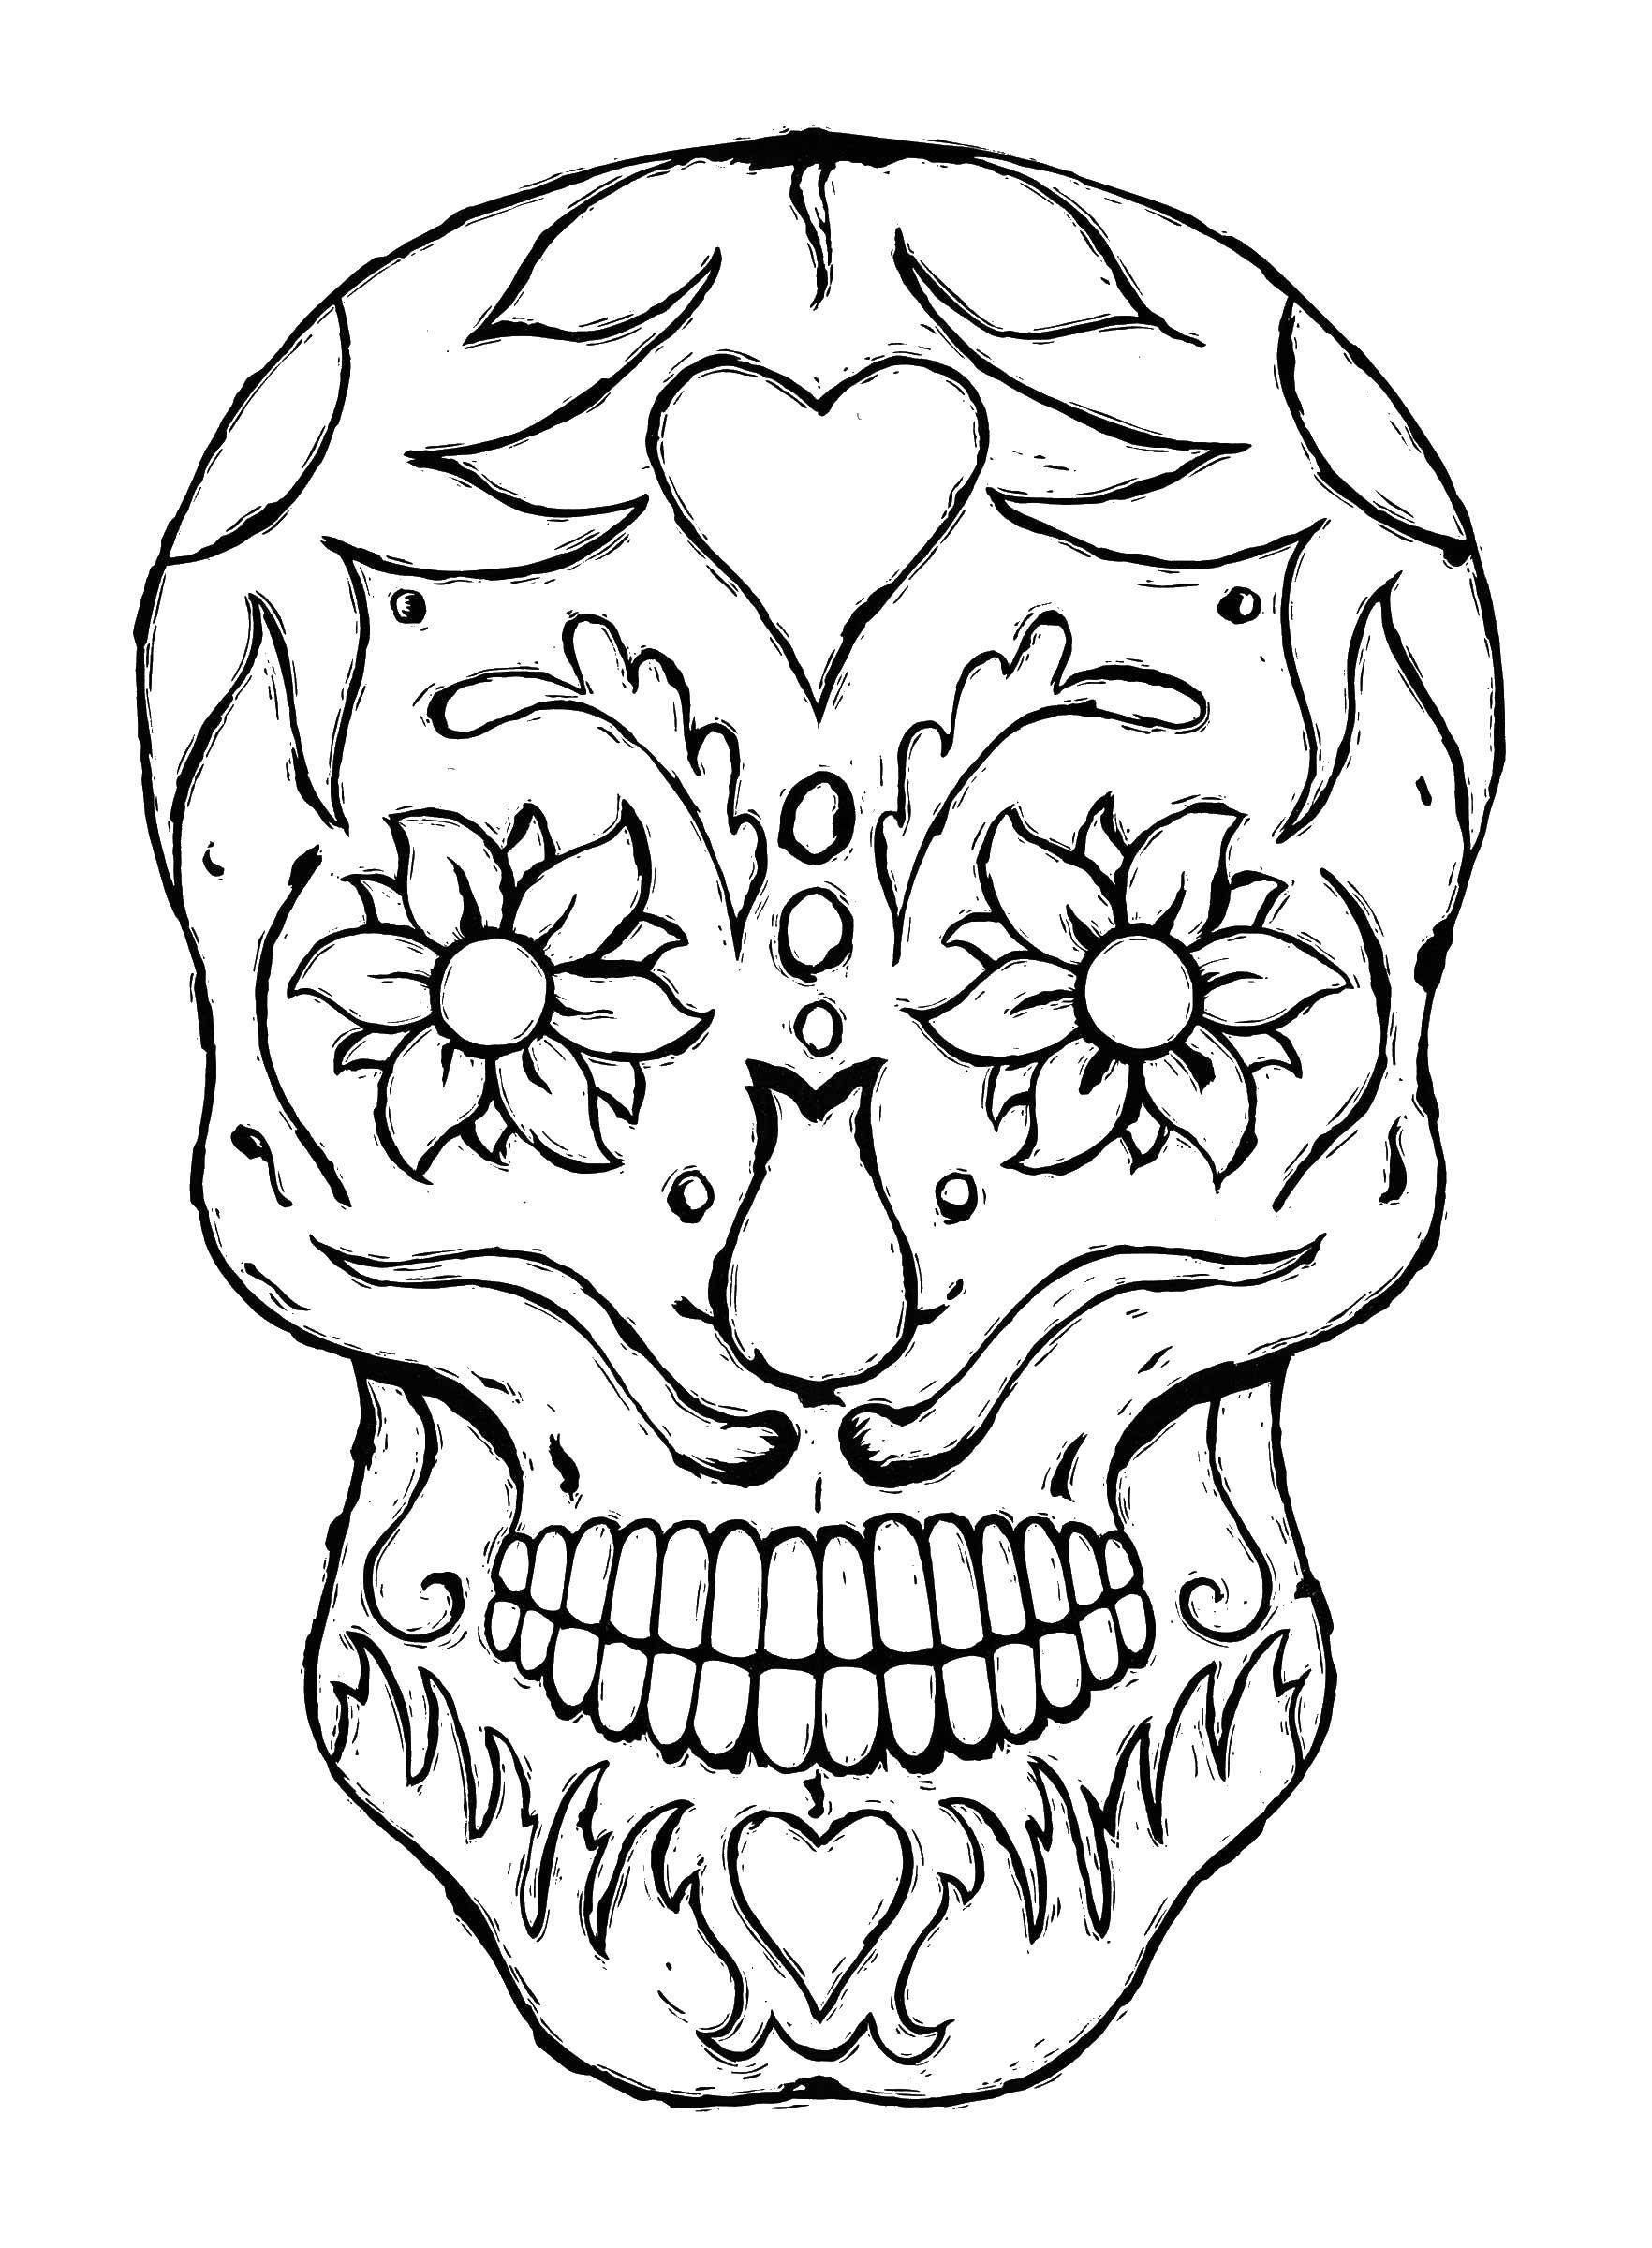 Coloring Skull and patterns. Category coloring pages for teenagers. Tags:  skull, patterns, teeth.